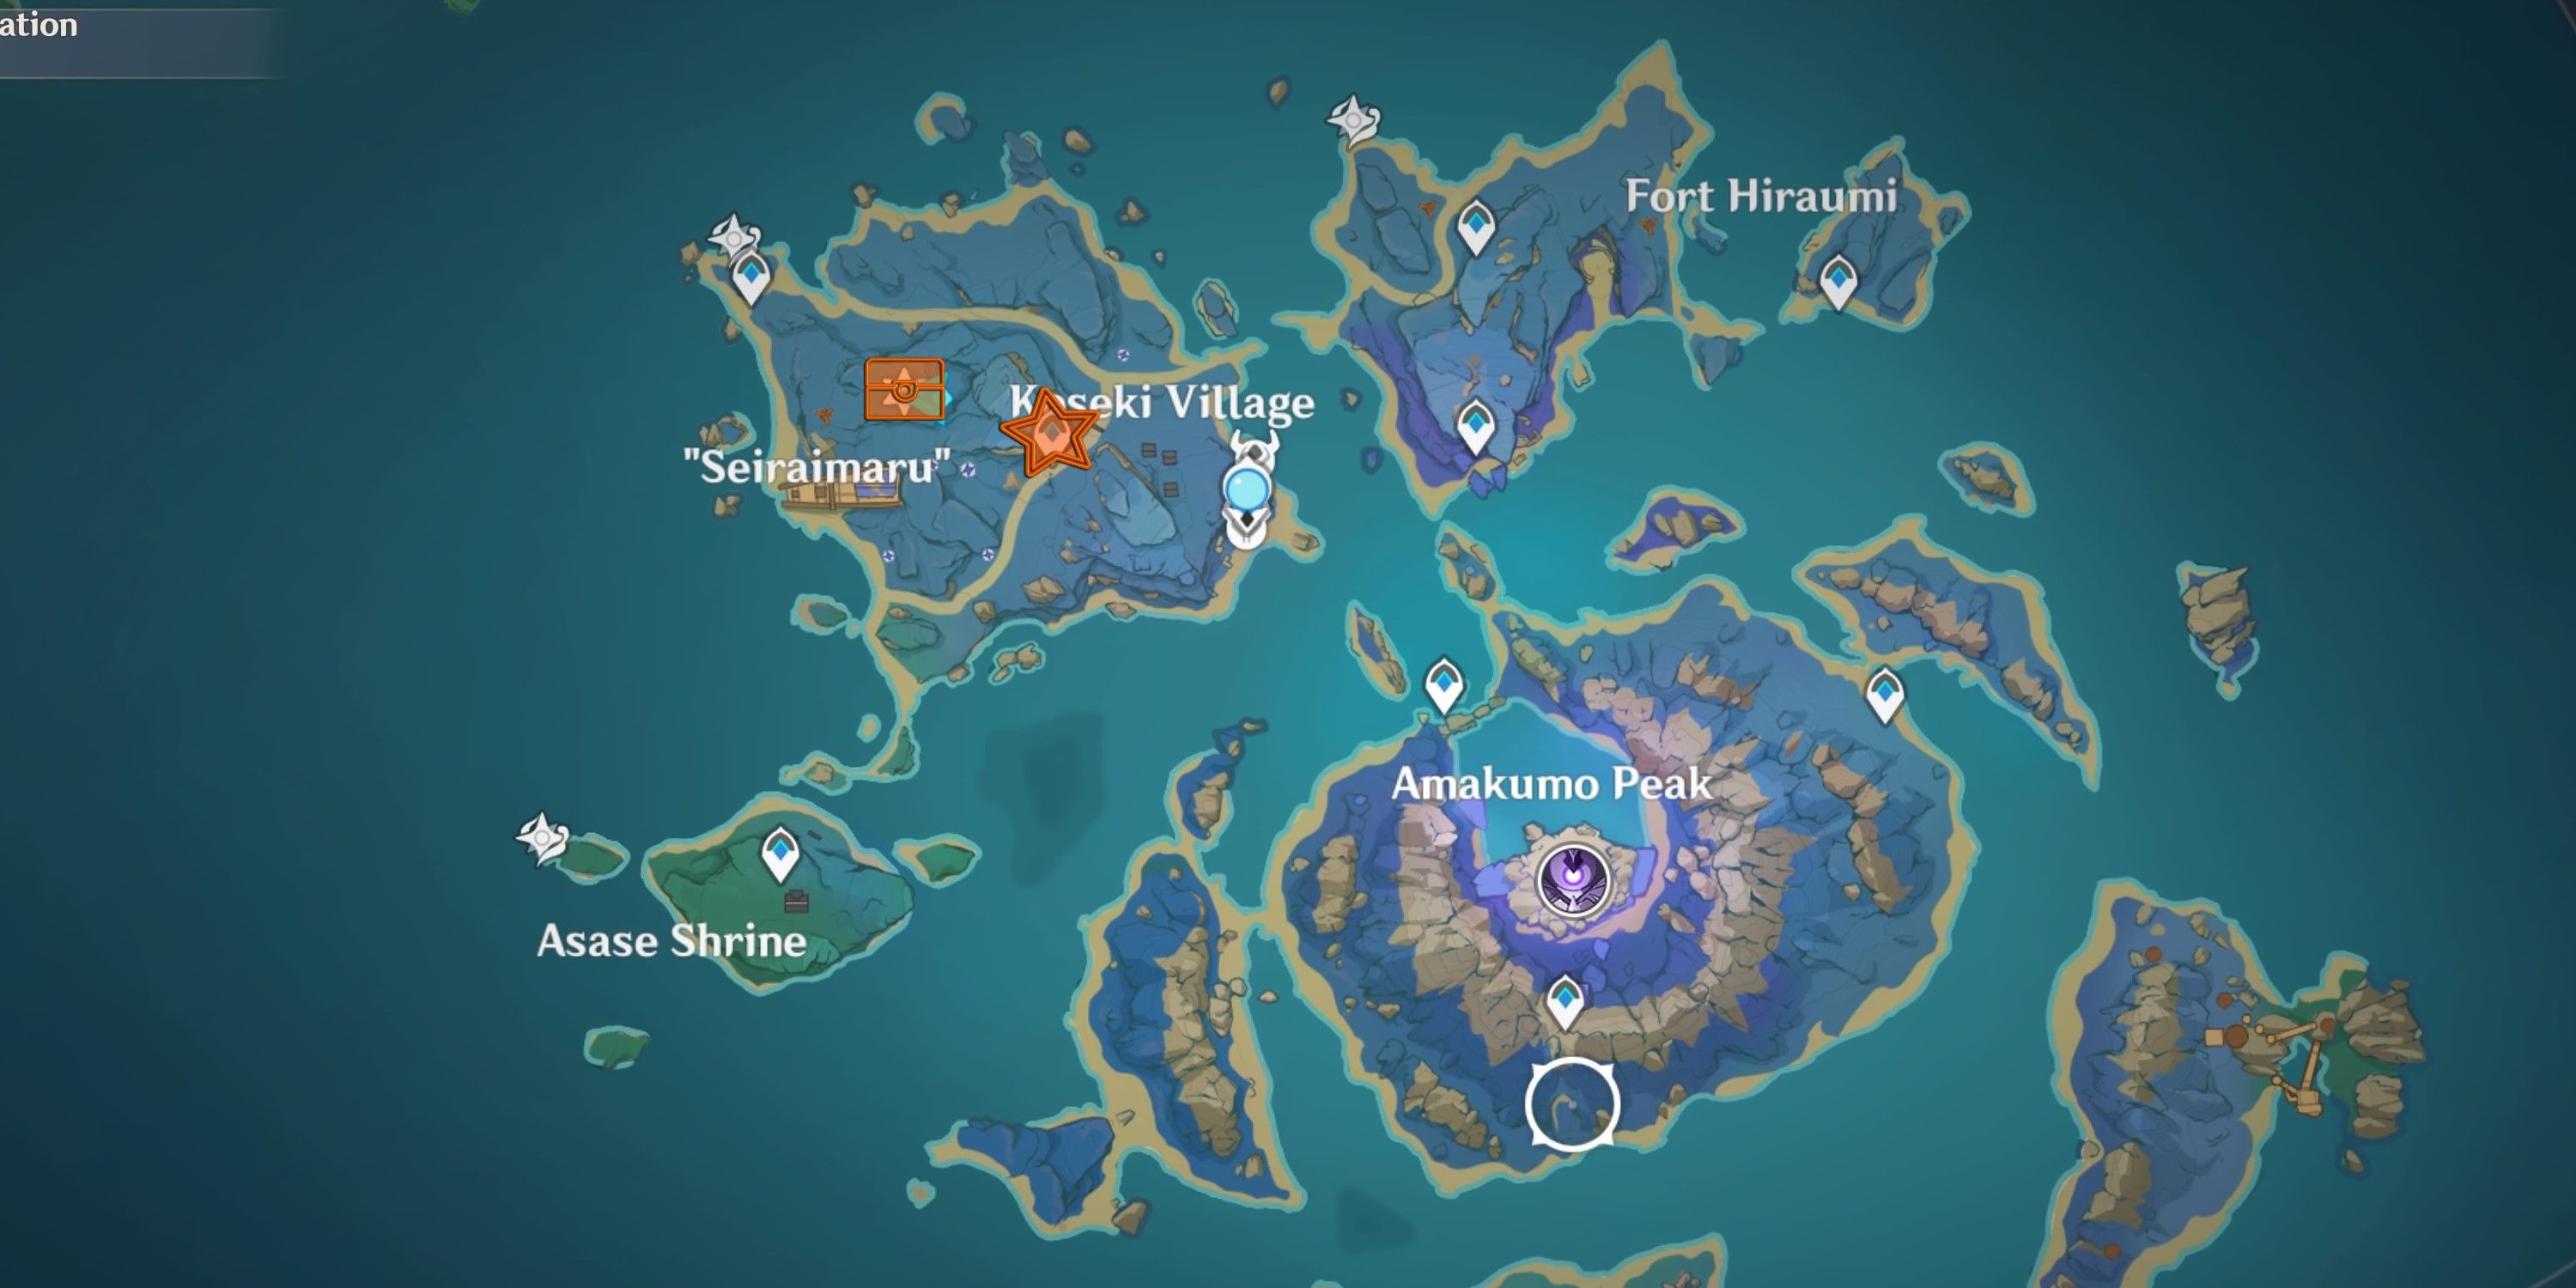 Genshin Impact: Shrine of Depth Map showing Serai Island, the map shows highlighted areas